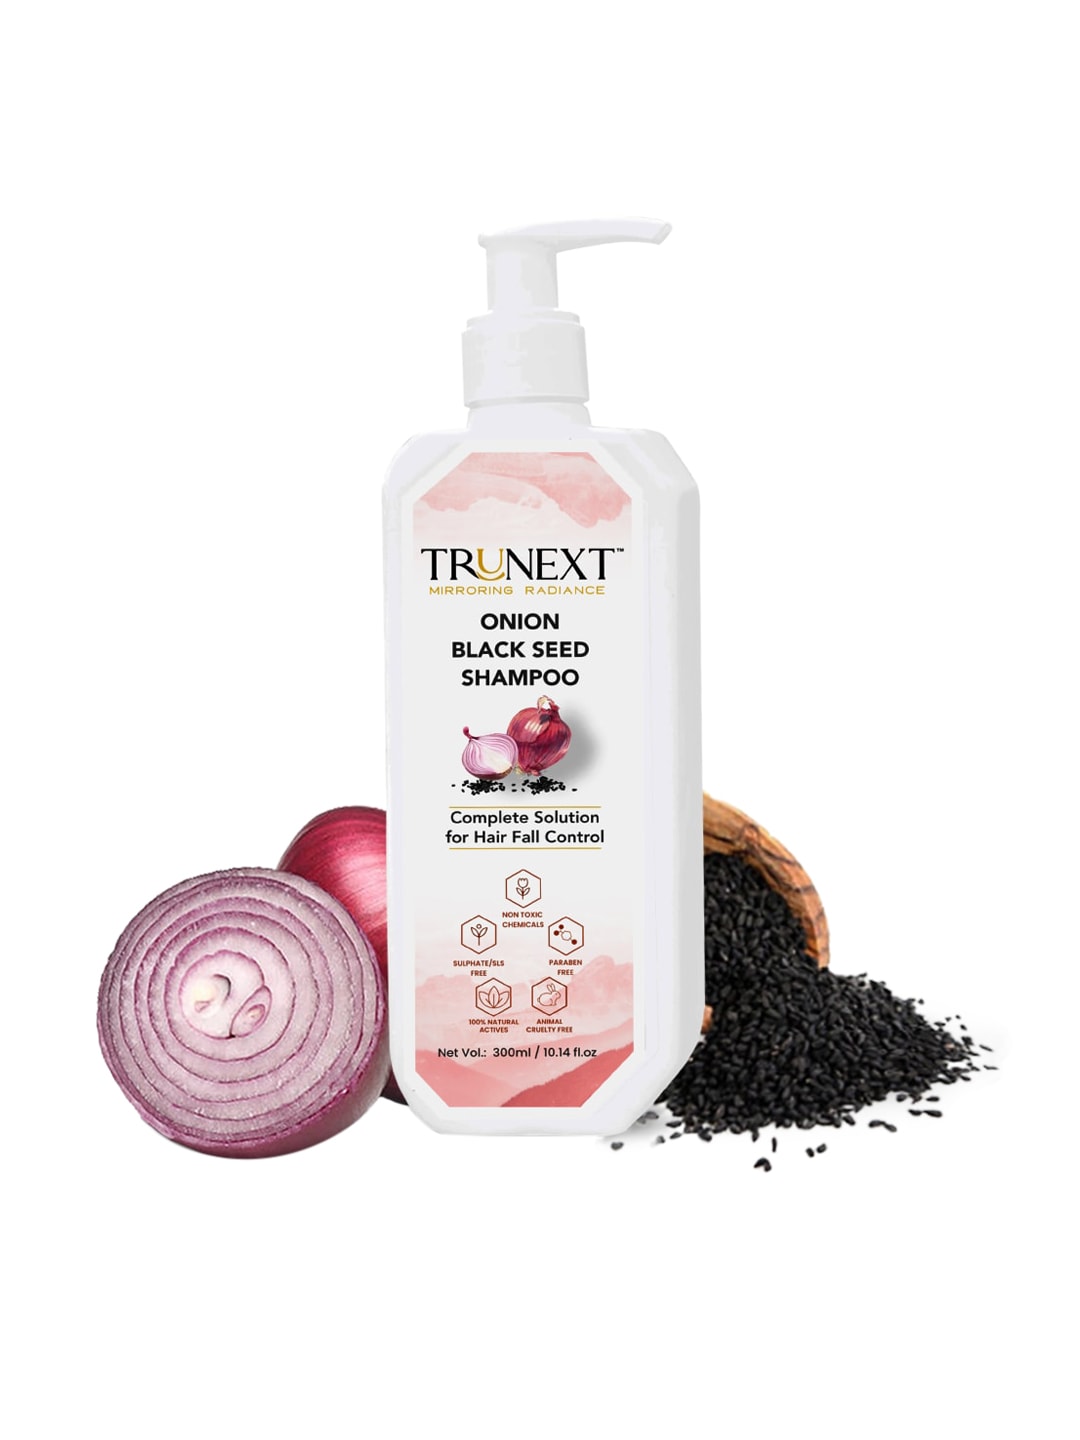 TRUNEXT Onion Black Seed Shampoo 300 ml Price in India